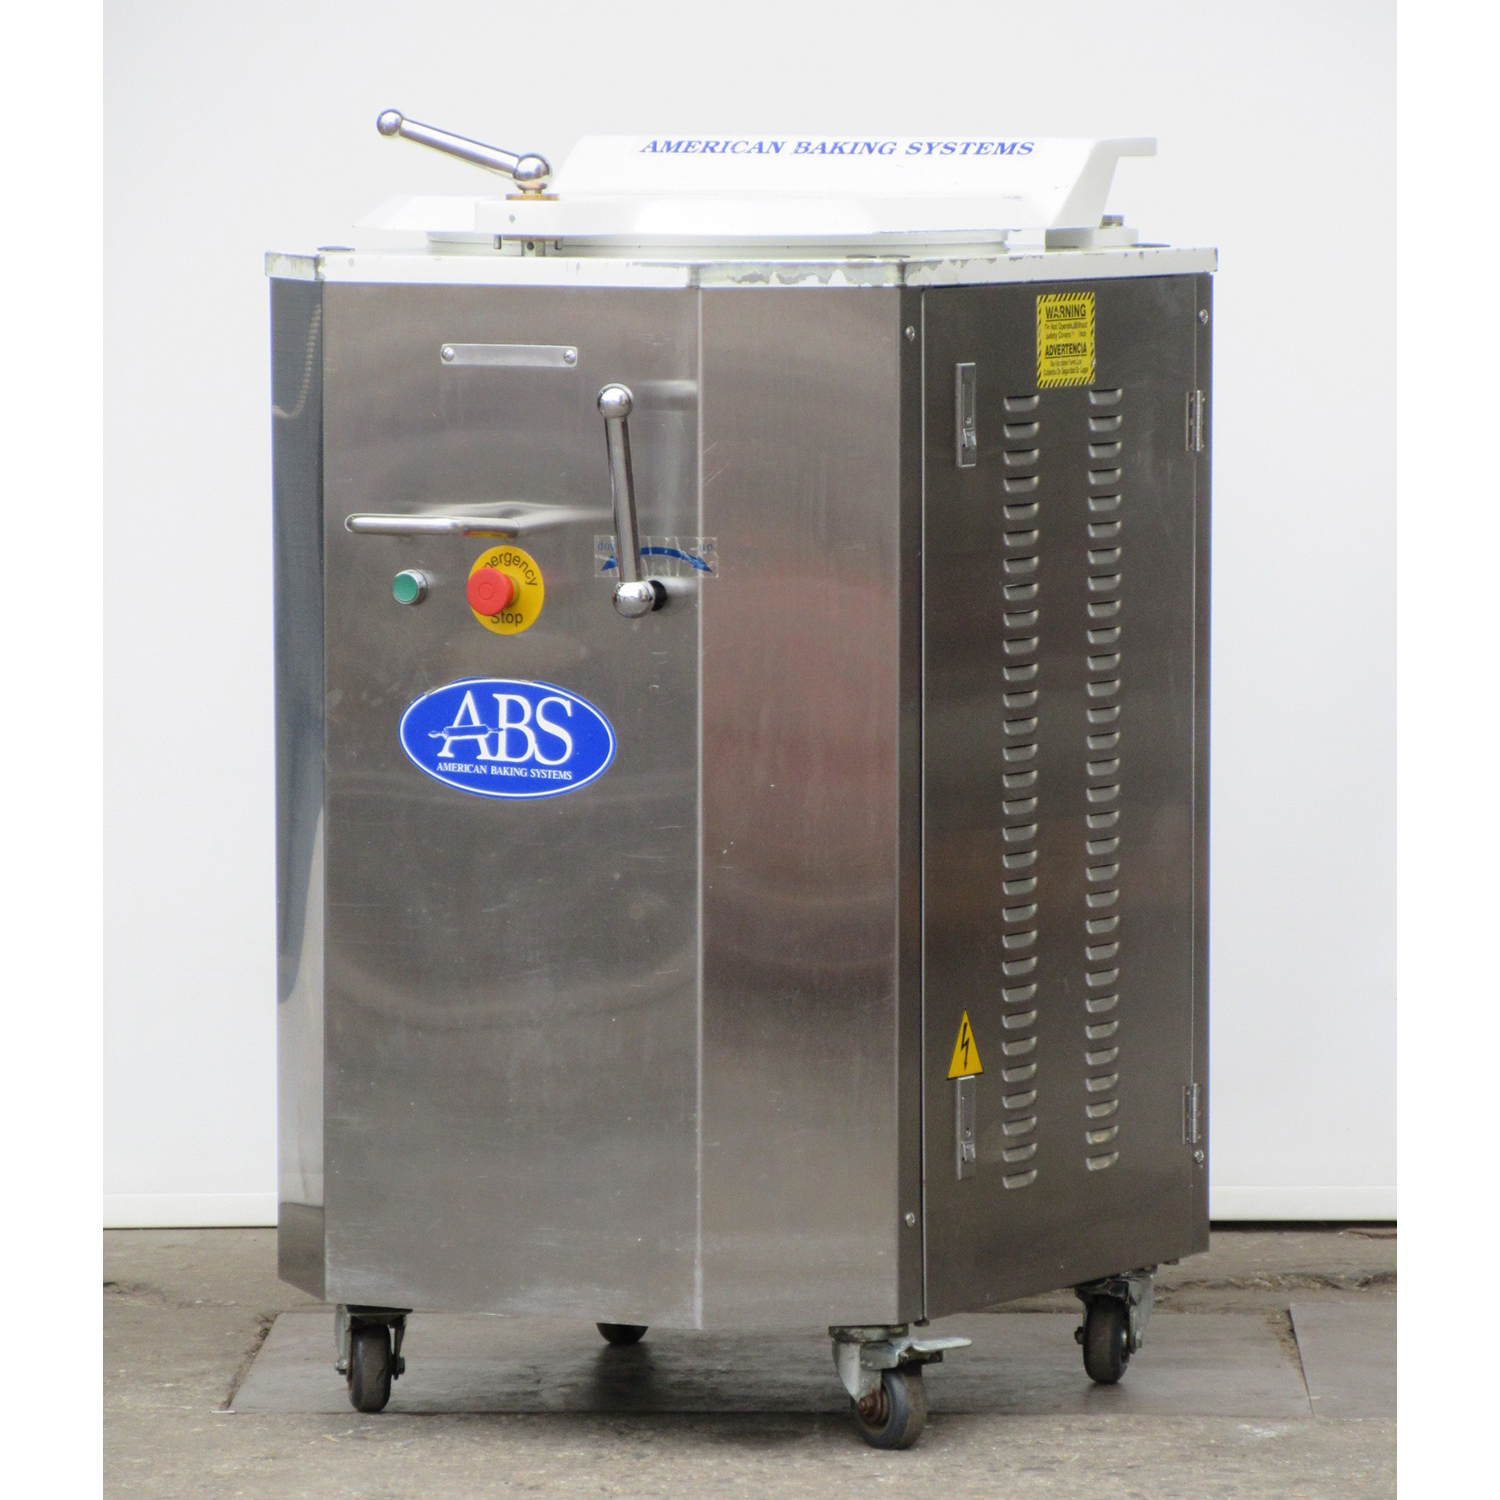 ABS ABSHDD20 Hydraulic 20 Portion Dough Divider, Used Excellent Condition